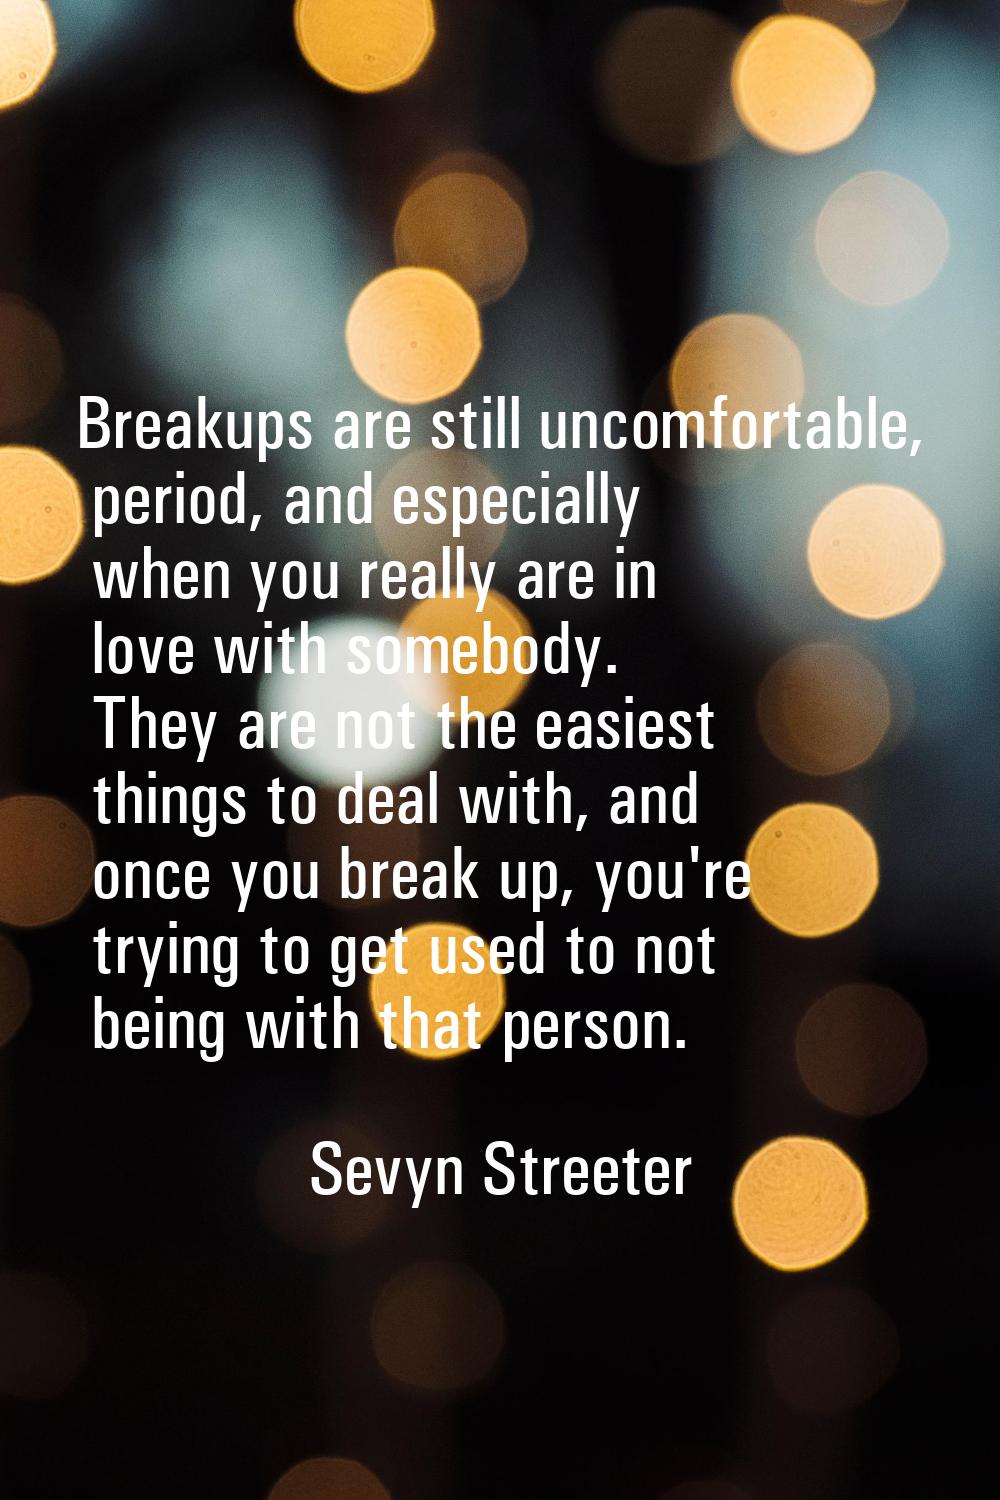 Breakups are still uncomfortable, period, and especially when you really are in love with somebody.